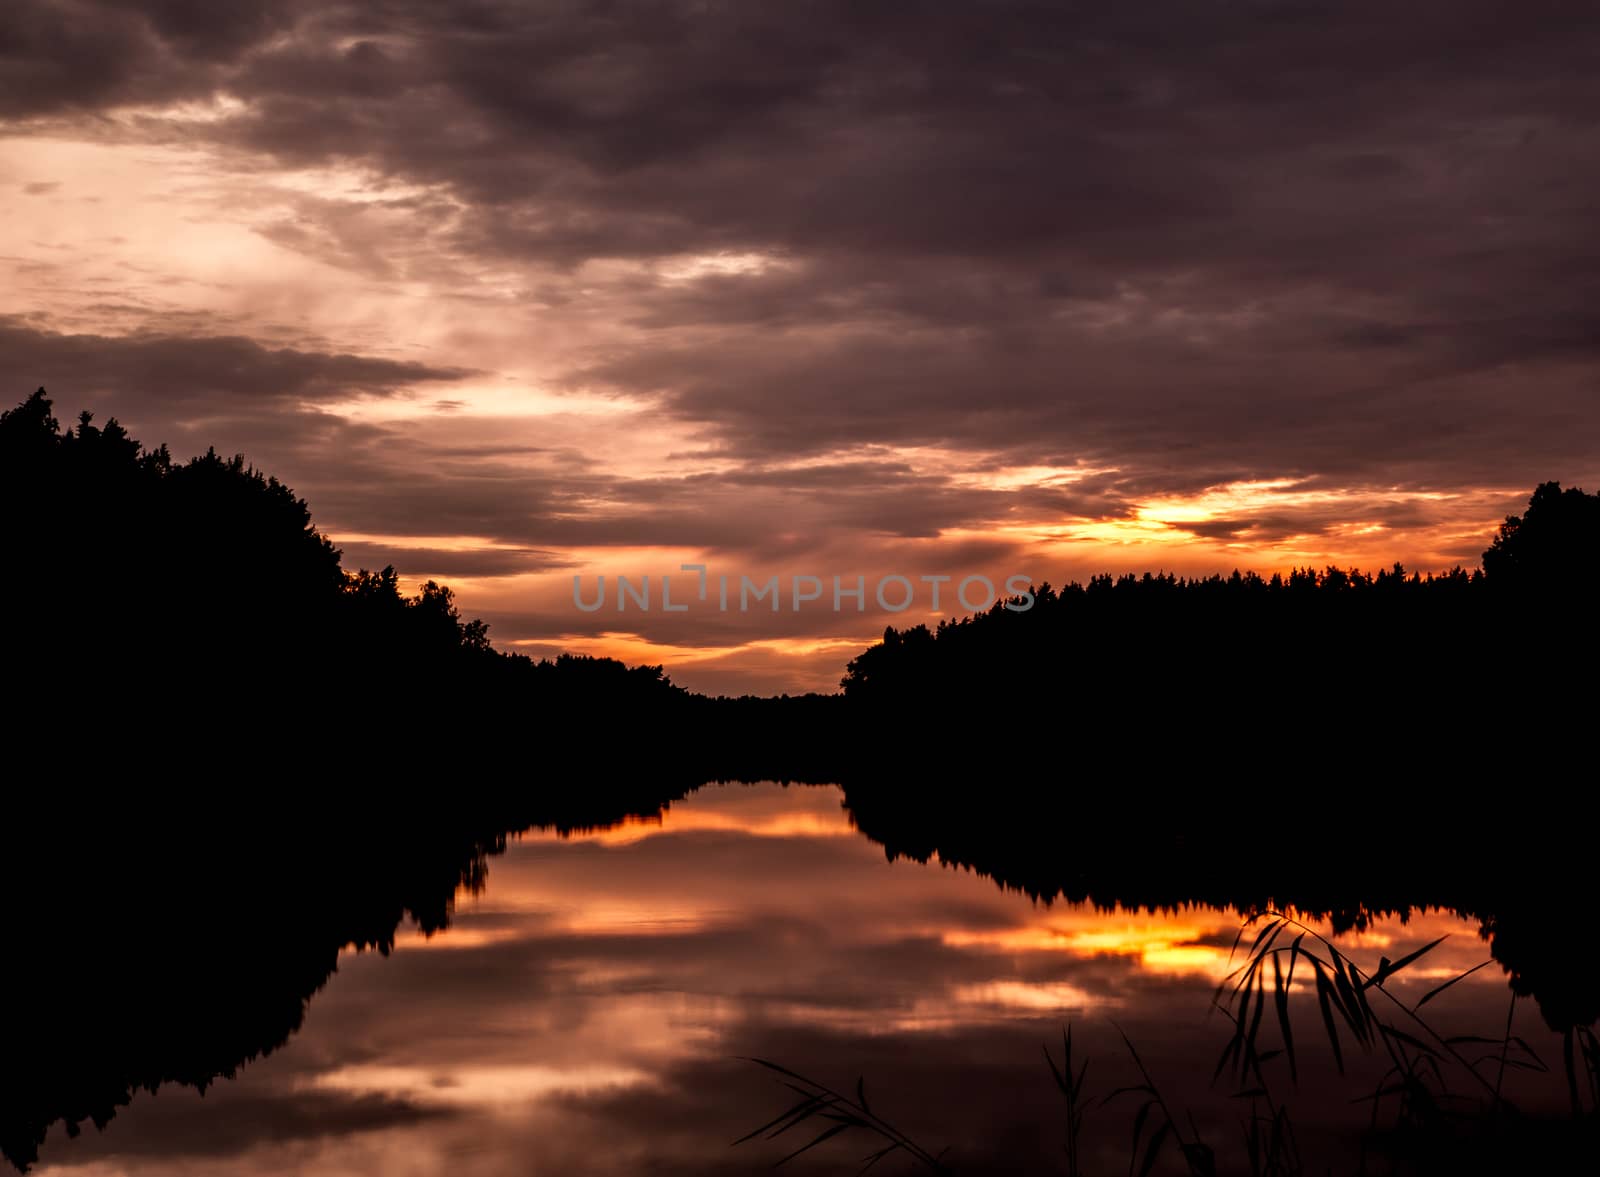 Beautiful sunset and reflections in Taivassalo, Finland. by leorantala